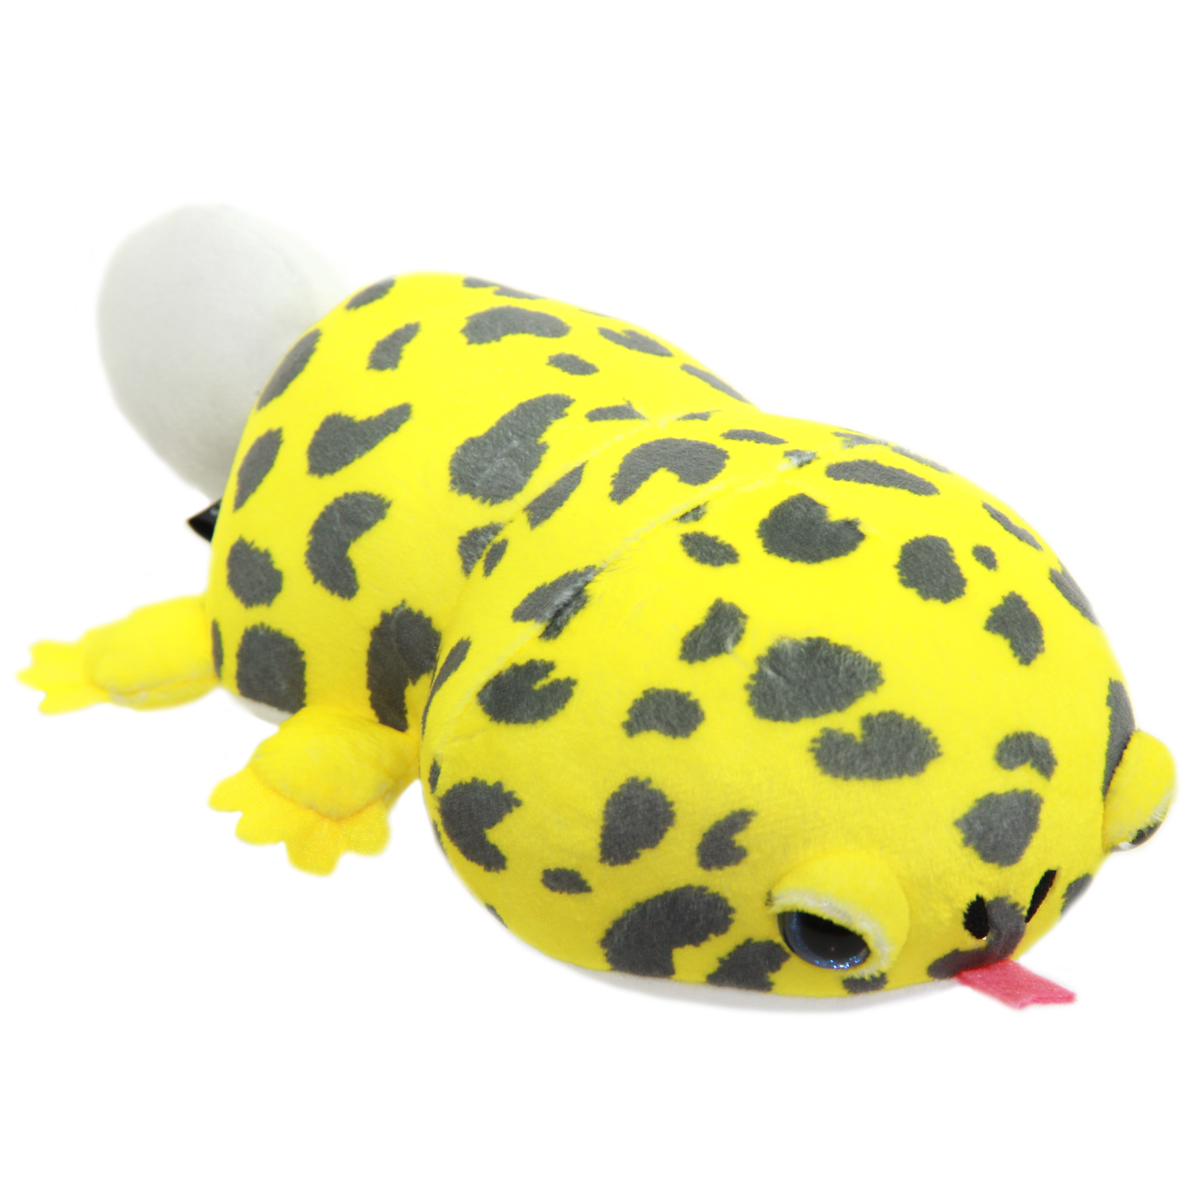 Leopard Gecko Plush Collection Lizard Plush Toy Super Soft Stuffed Animal Yellow White 9 Inches